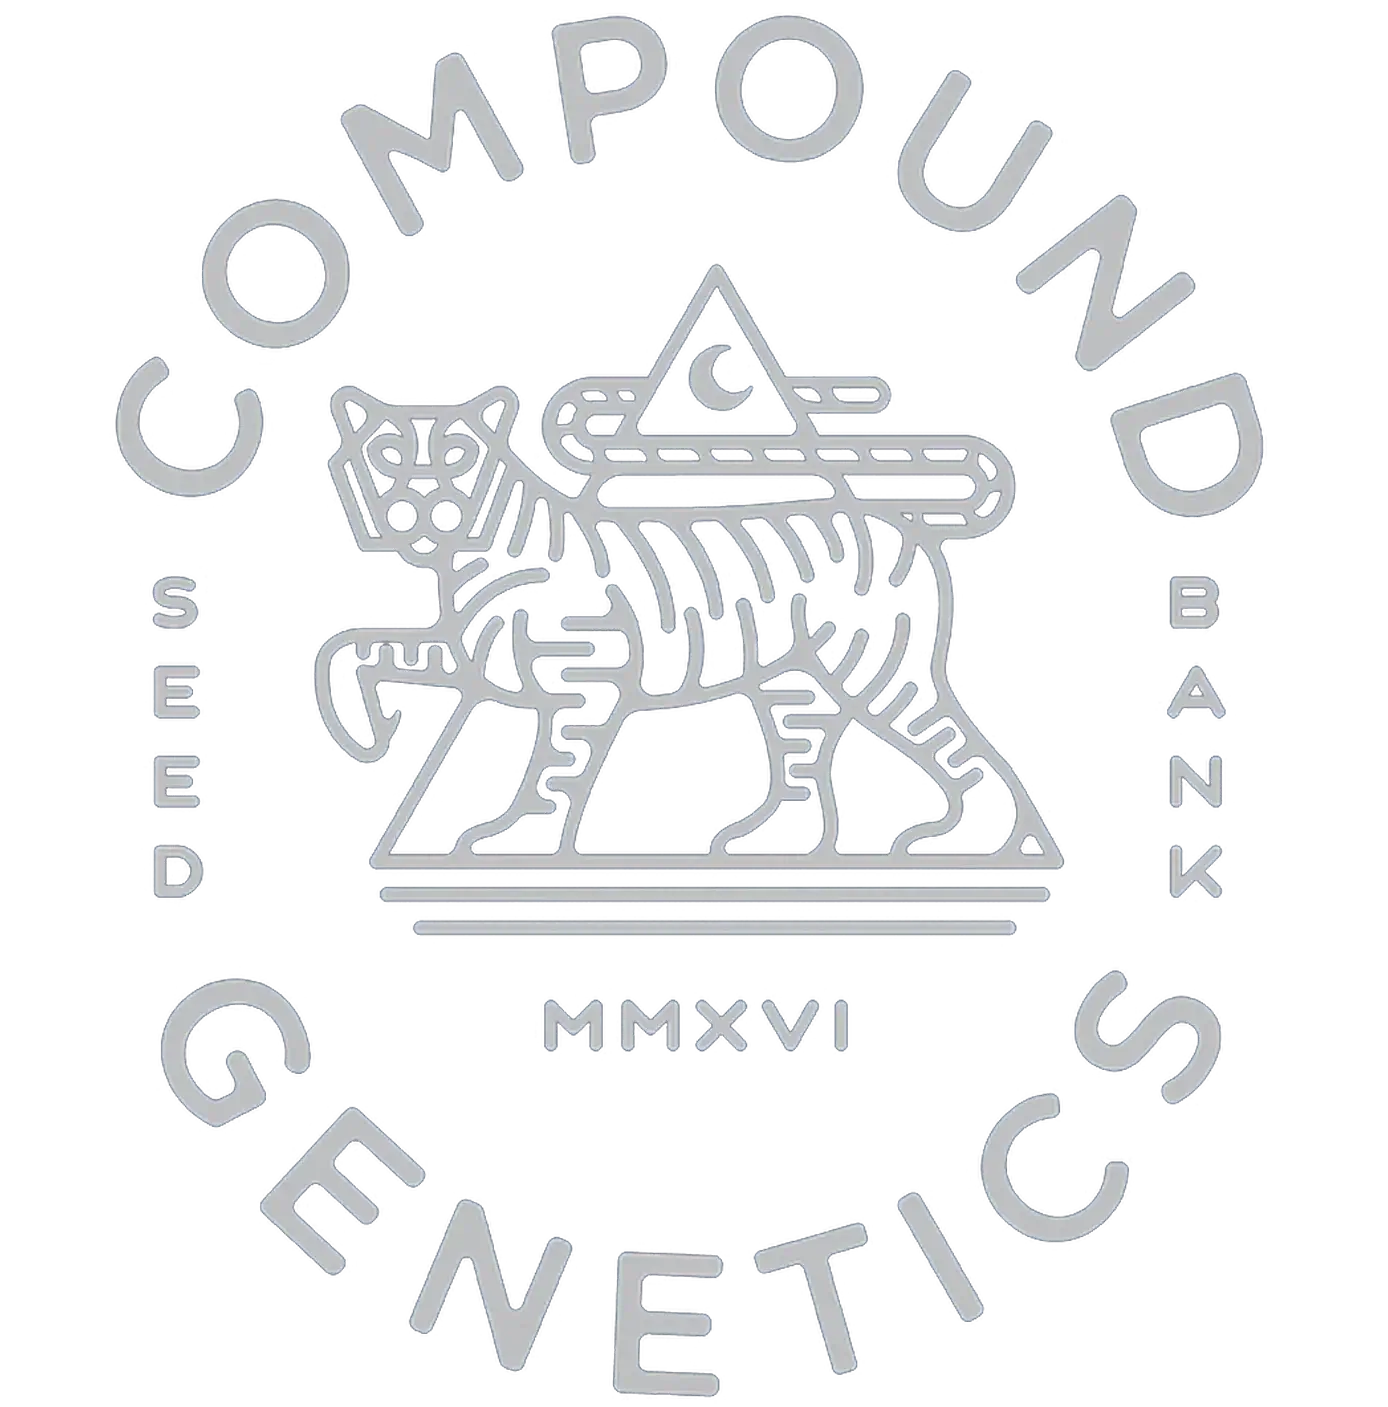 compound seed bank